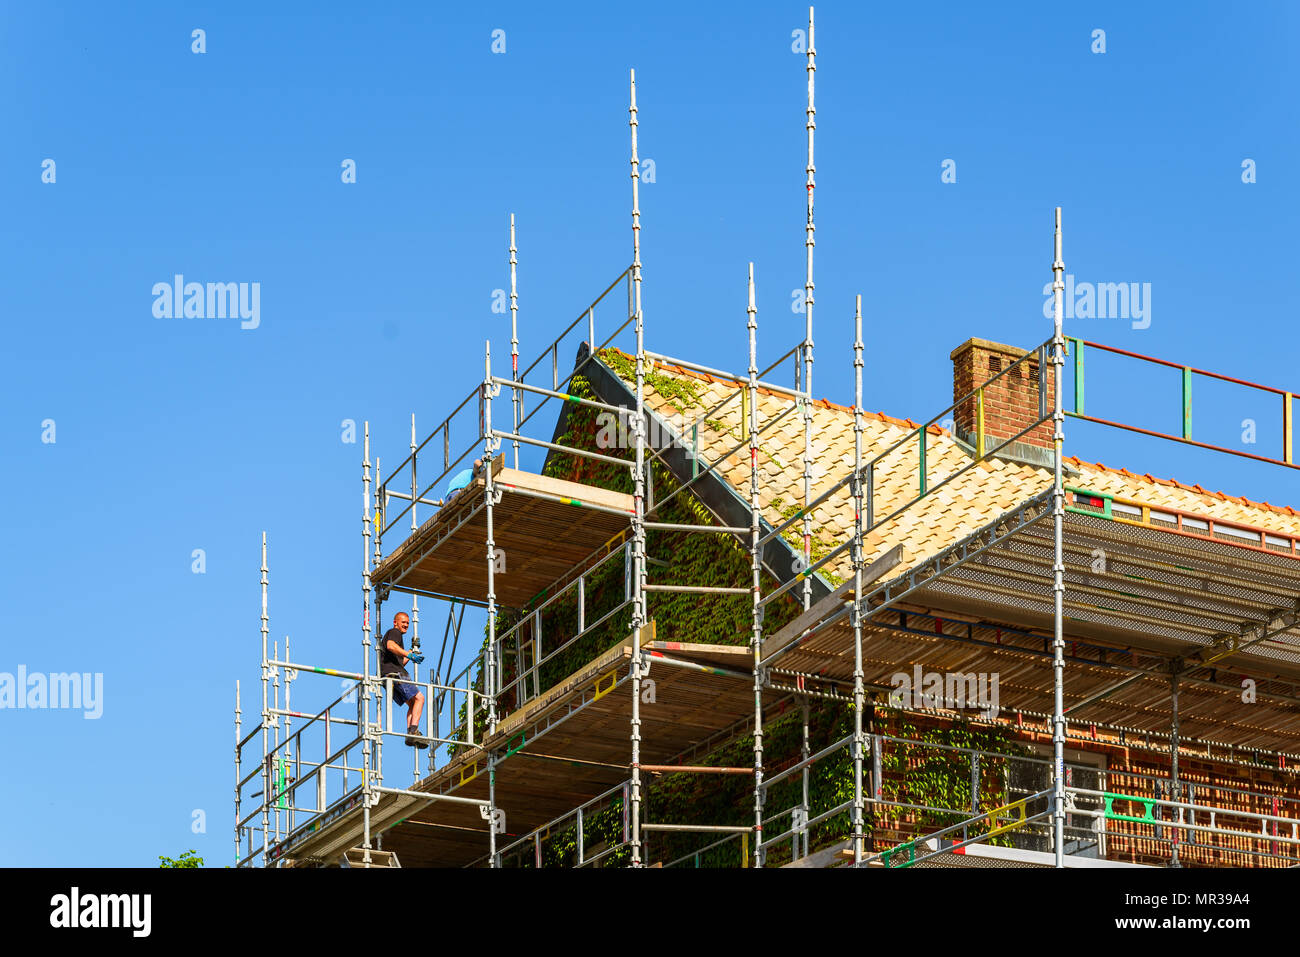 Angelholm, Sweden - May 15, 2018: Travel documentary of everyday life and place. Workers rising scaffoldings around the historical building Kronohakte Stock Photo